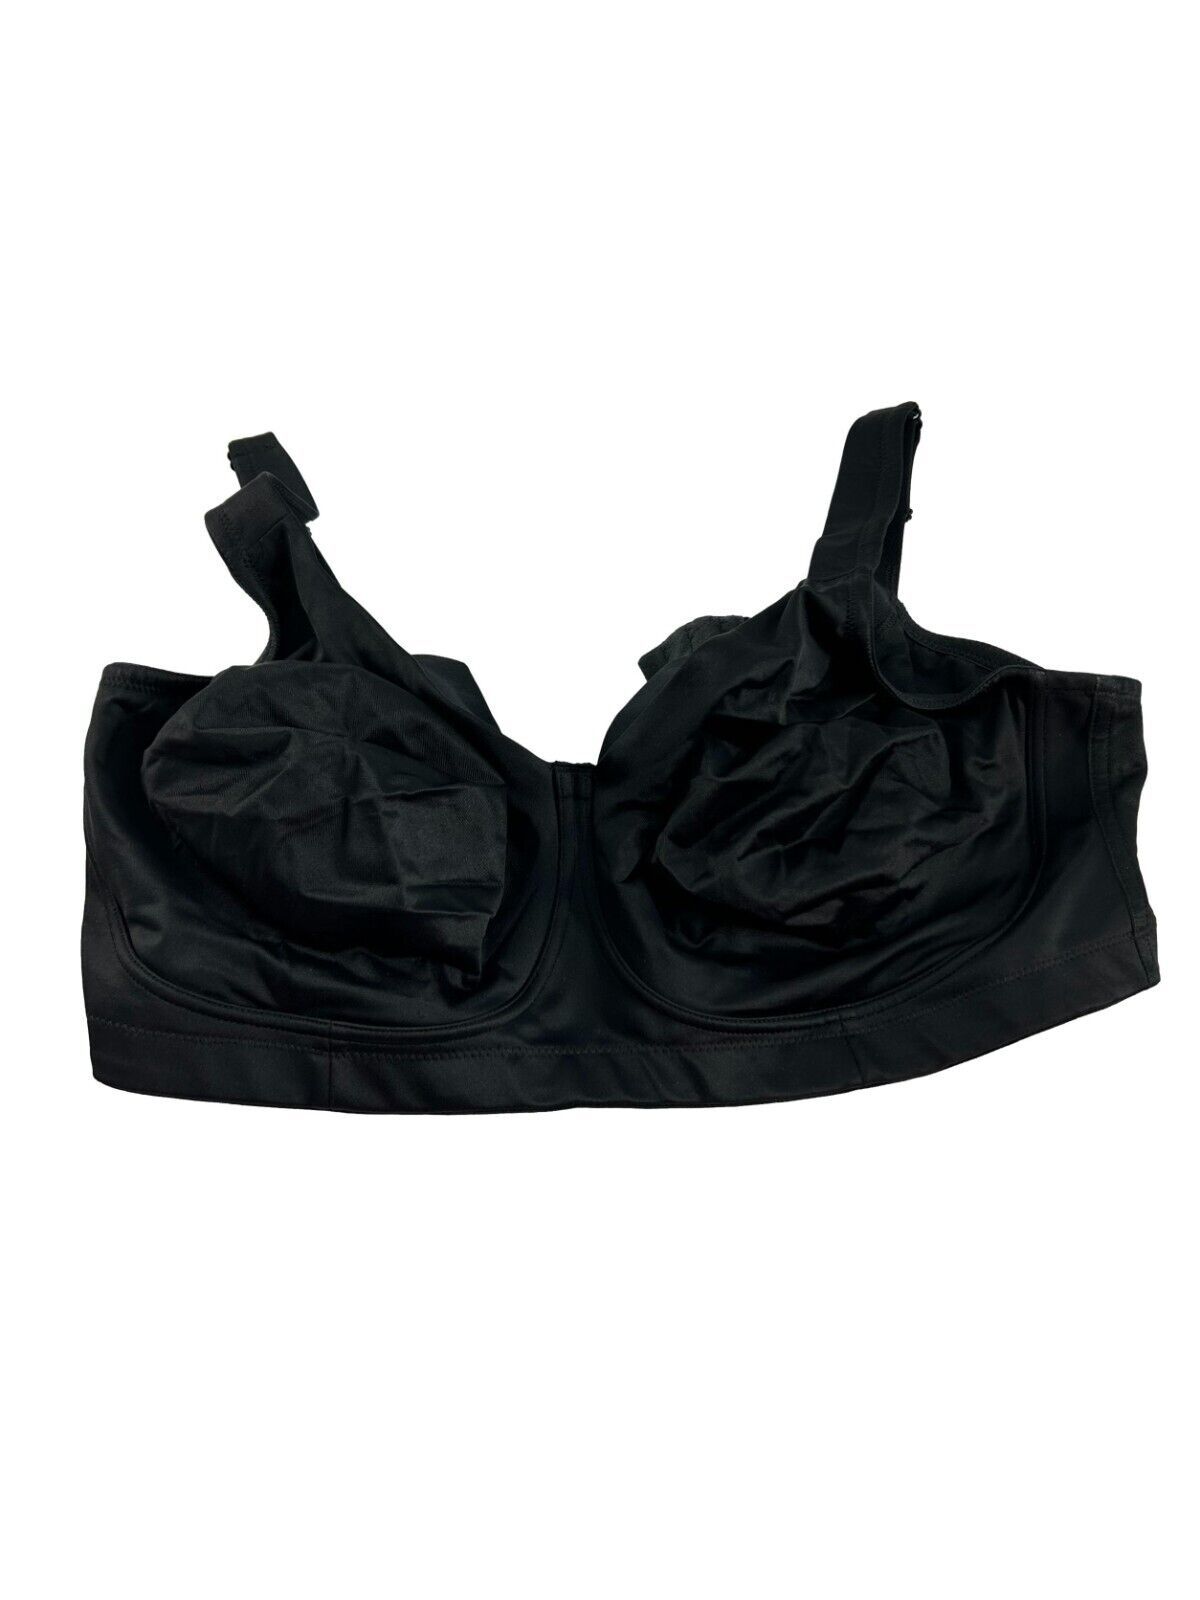 Cacique Womens Bra Size 46DDD Black Wireless and 31 similar items